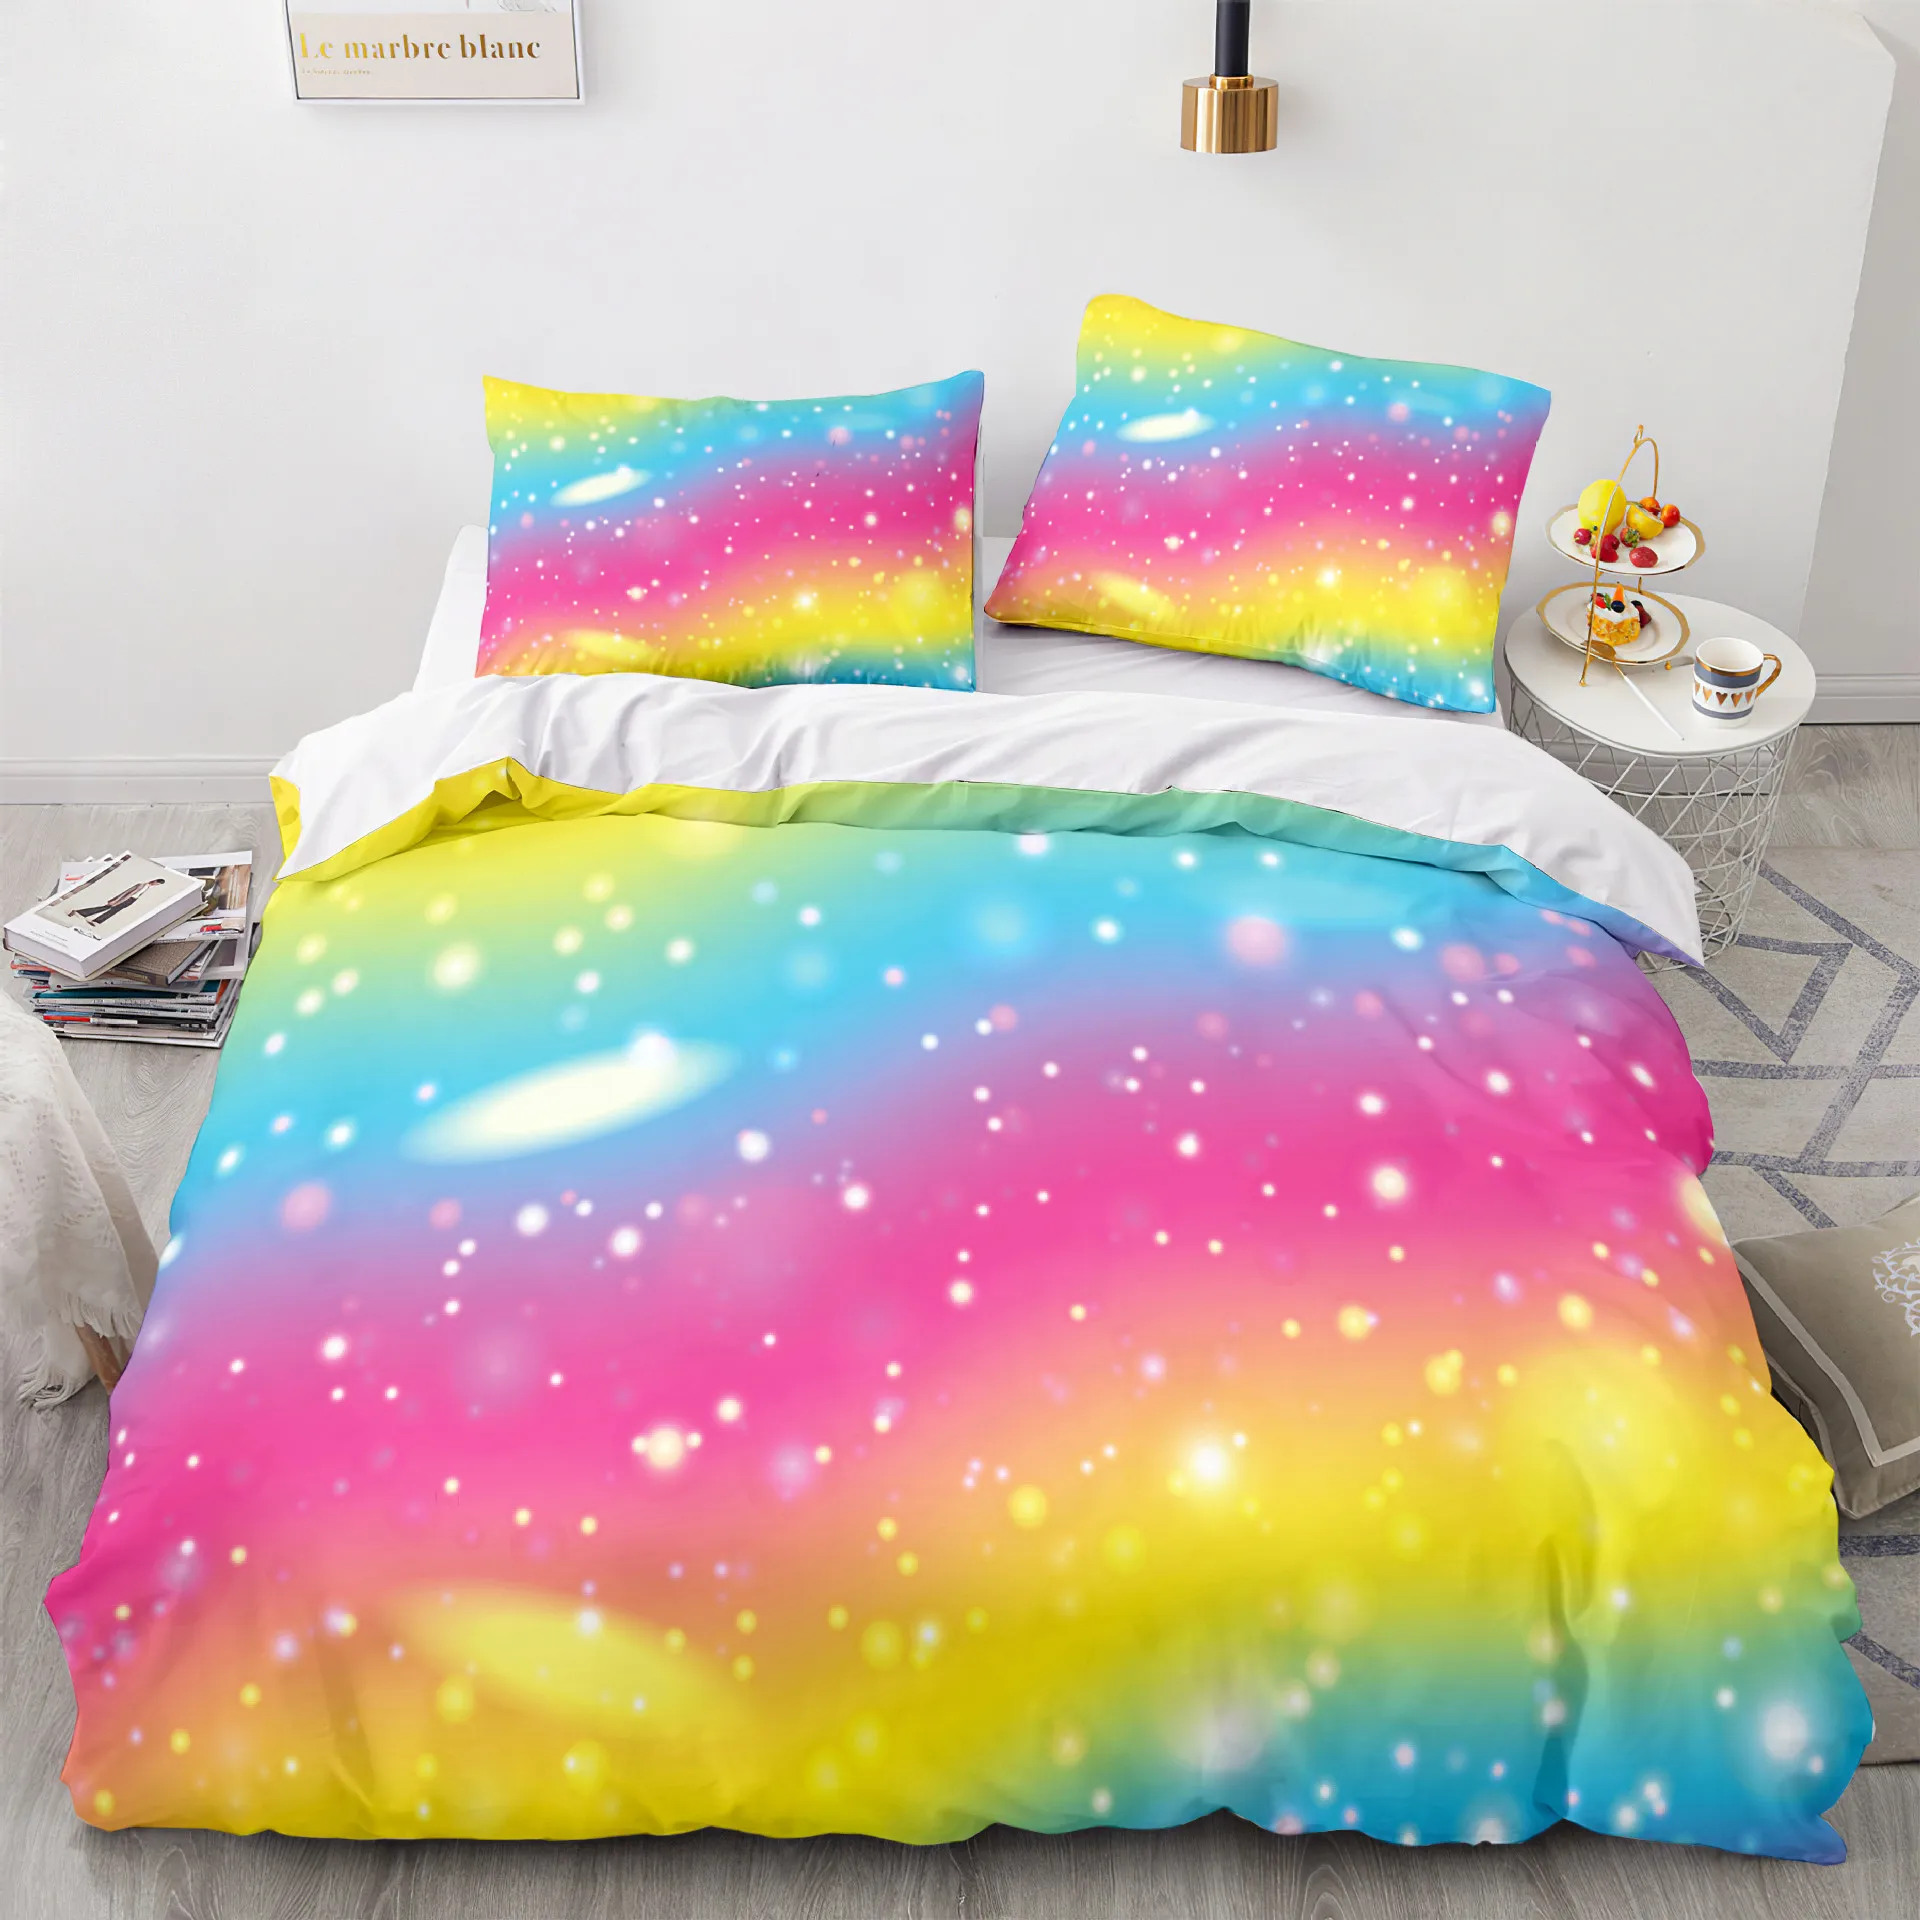 

Rainbow Duvet Cover Beautiful Colorful Glitter for Kids Girls Shining Abstract Art Theme for Bedroom Decorations Queen King Size